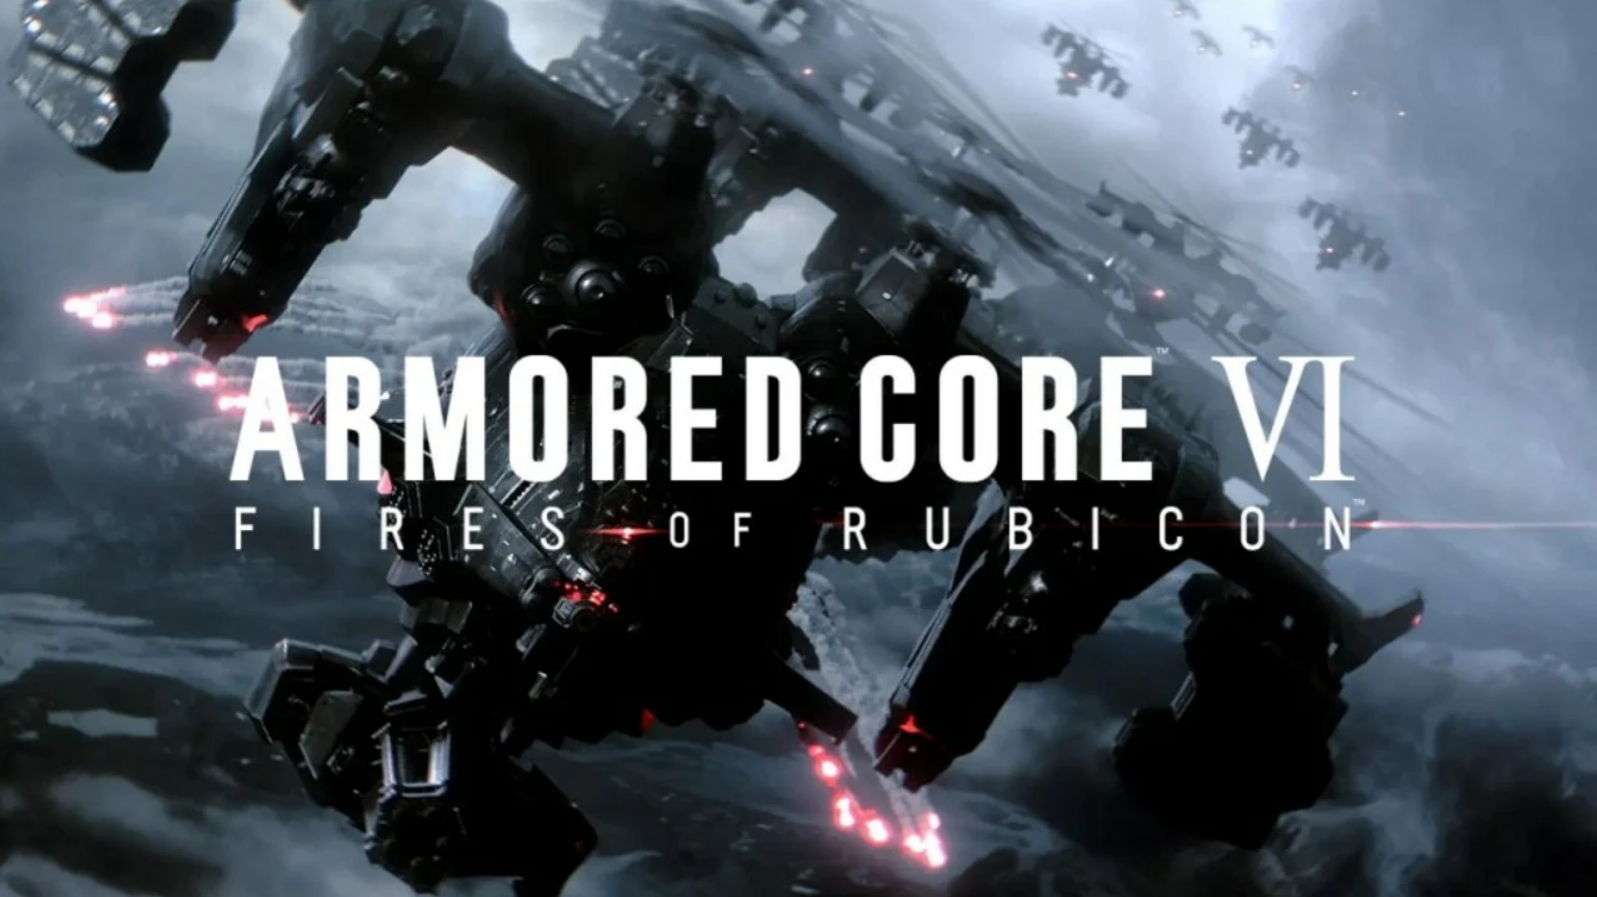 Armored Core 6: Fires of Rubicon (PS5) 4K 60FPS HDR Gameplay